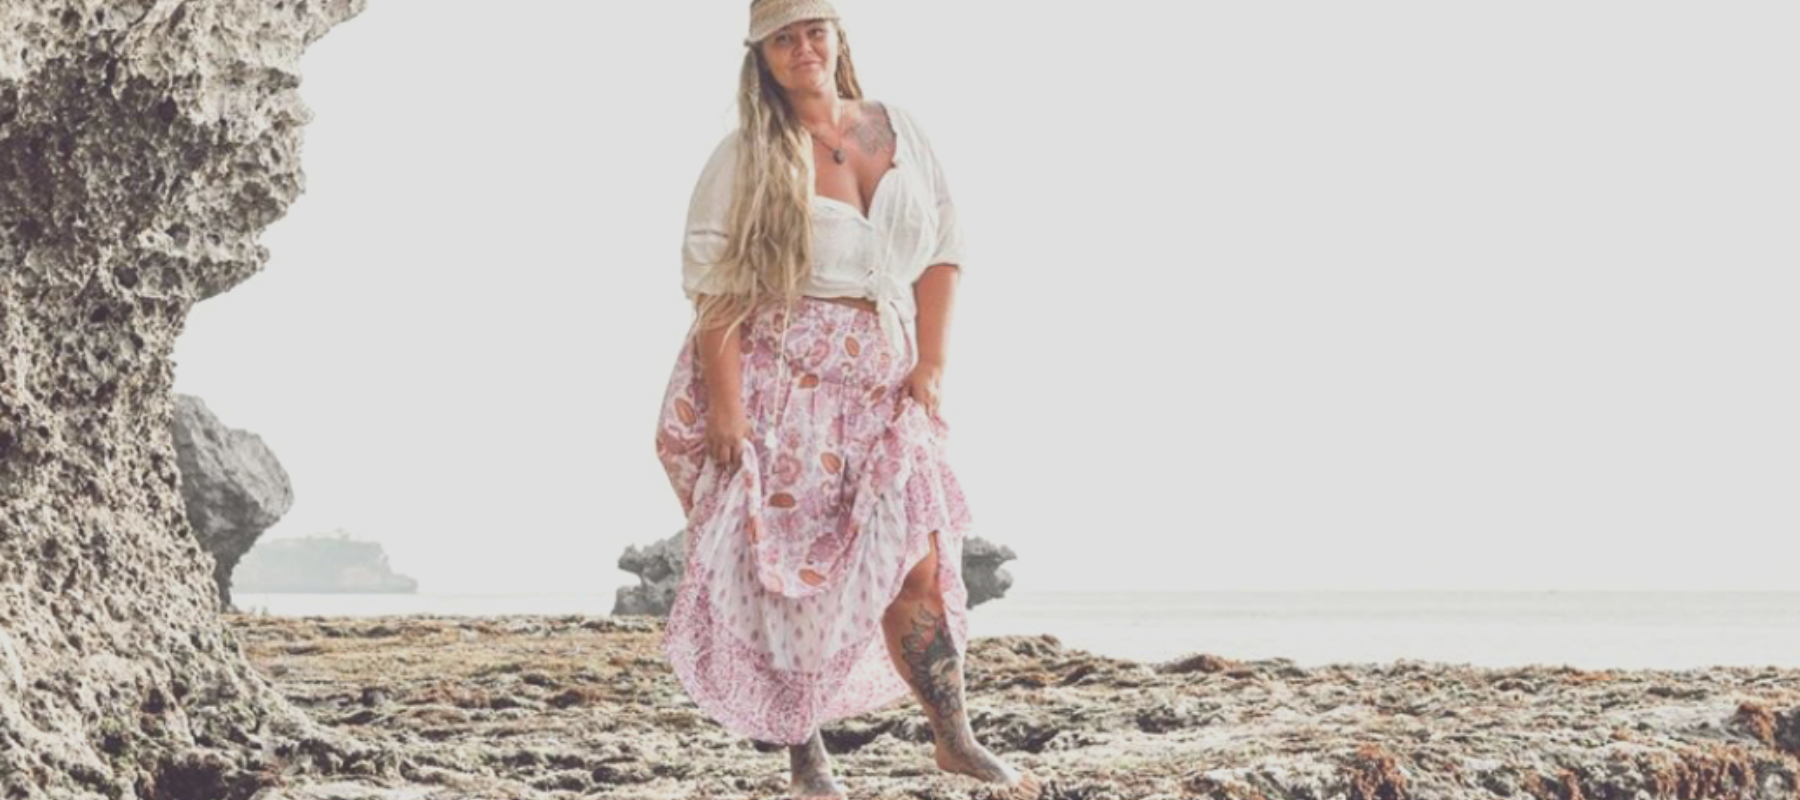 Boho Style for Plus-Size Women: How to Embrace Your Body and Fashion